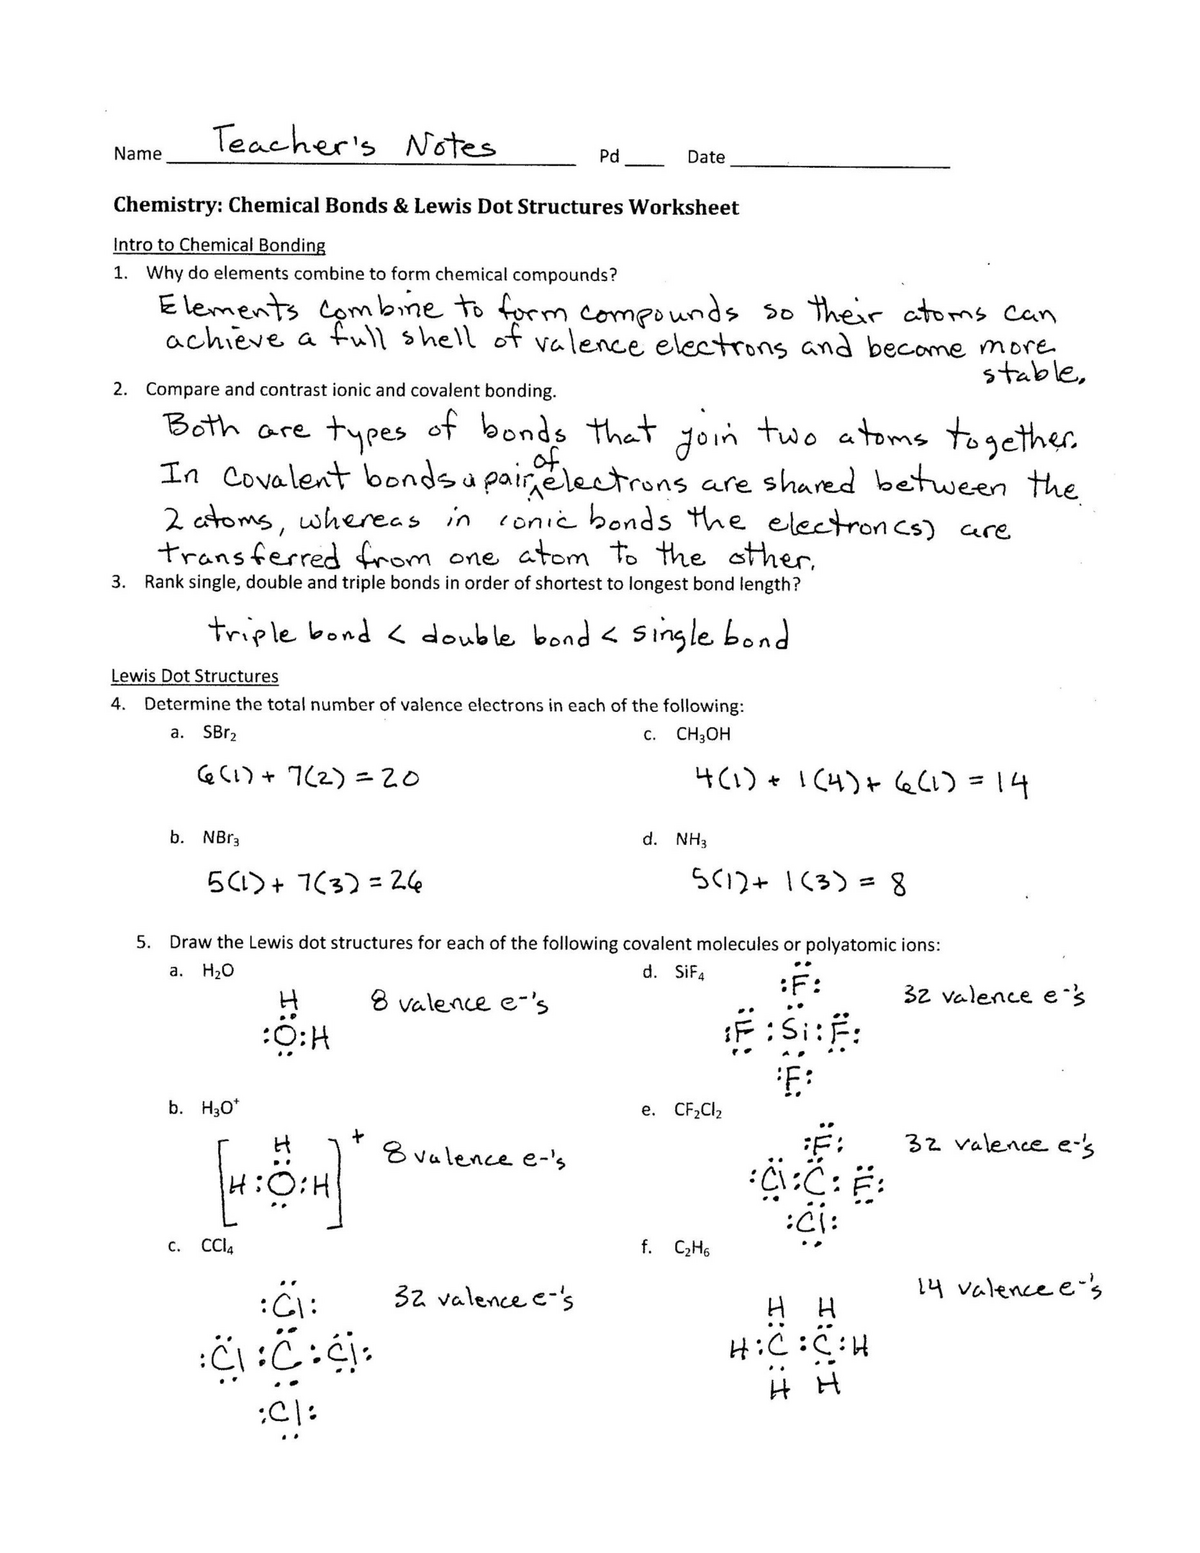 Chemical Bonds and Lewis Dot Structures Worksheet Answers In Lewis Structure Worksheet With Answers